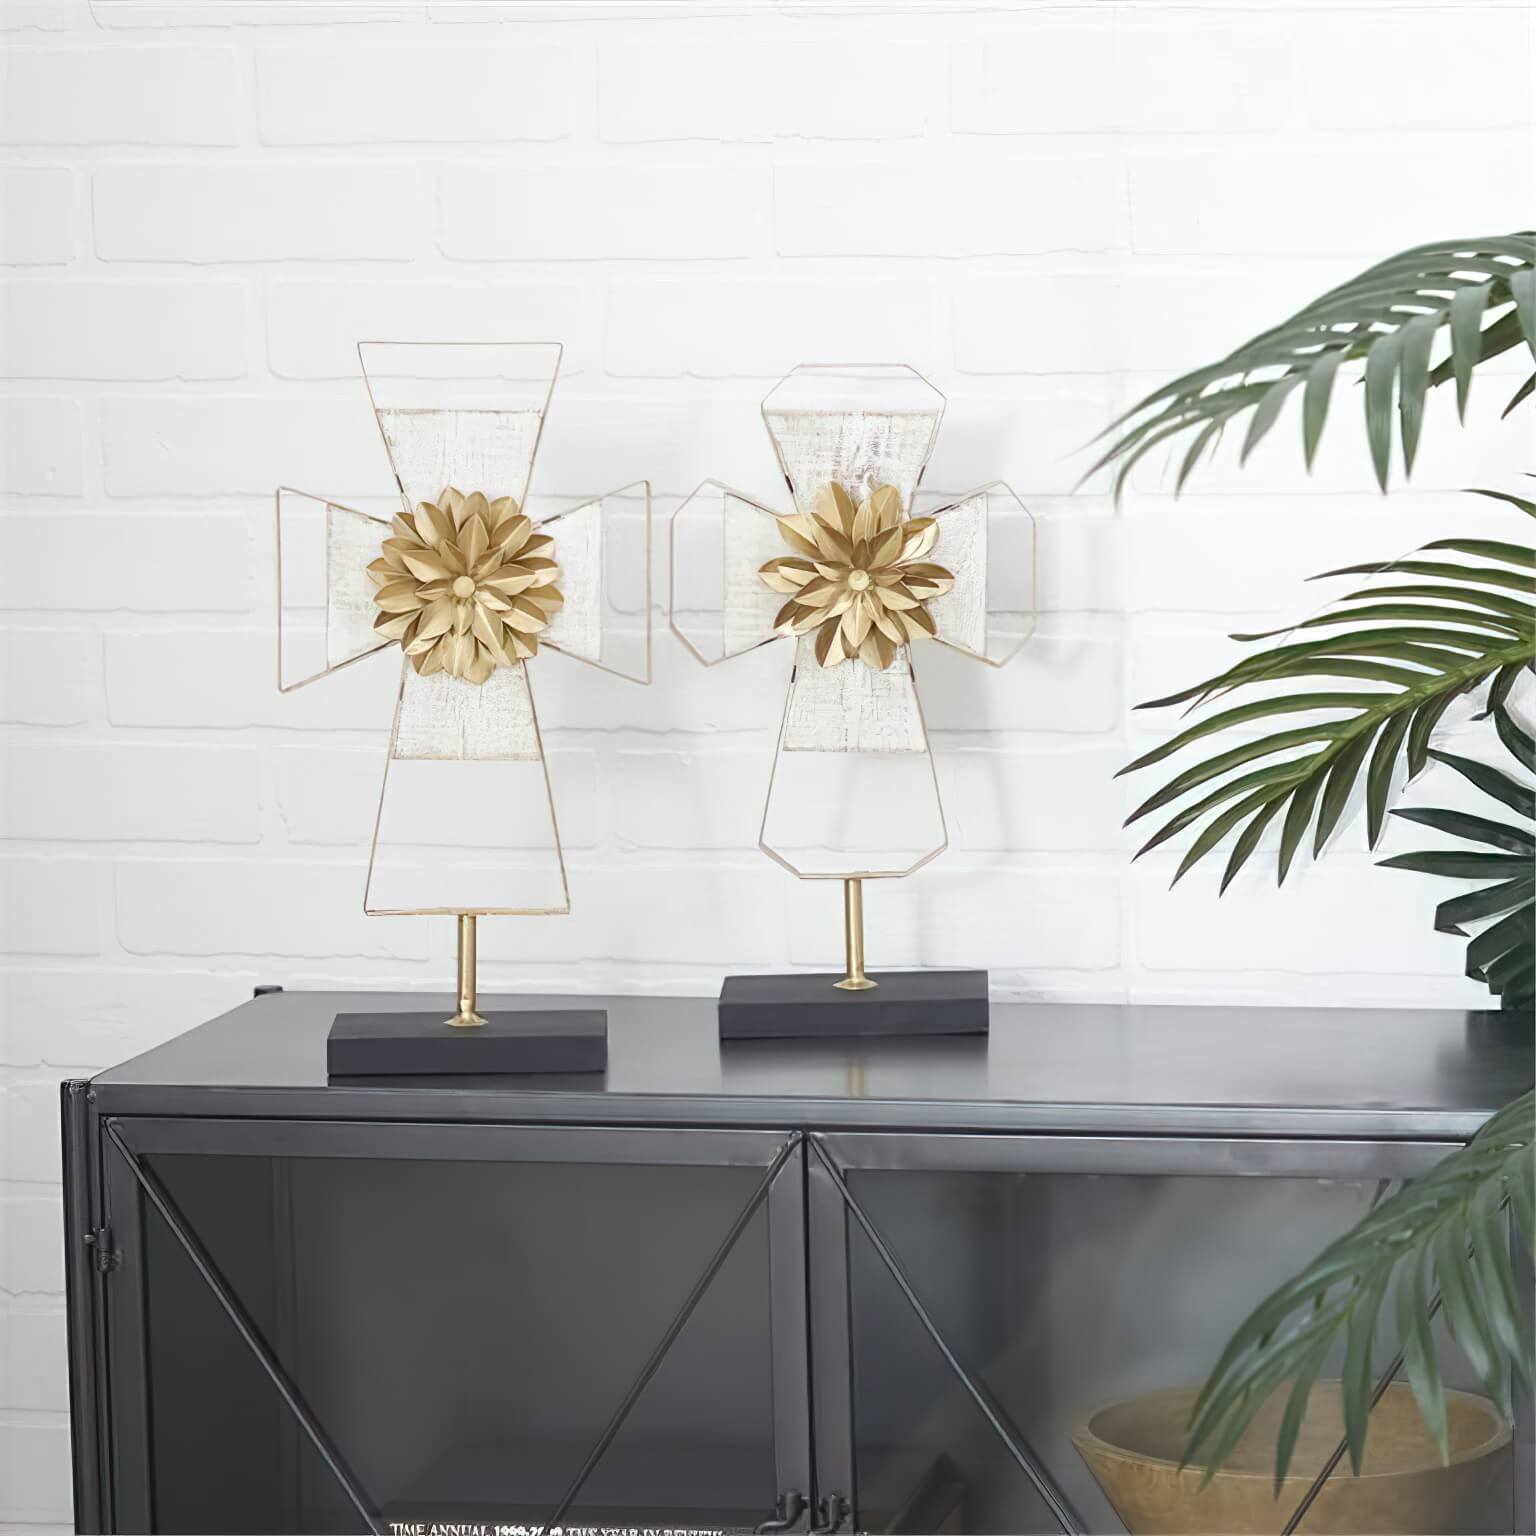 Gold & White Wood Crosses Elevate Home Decor - Sculptures & Statues